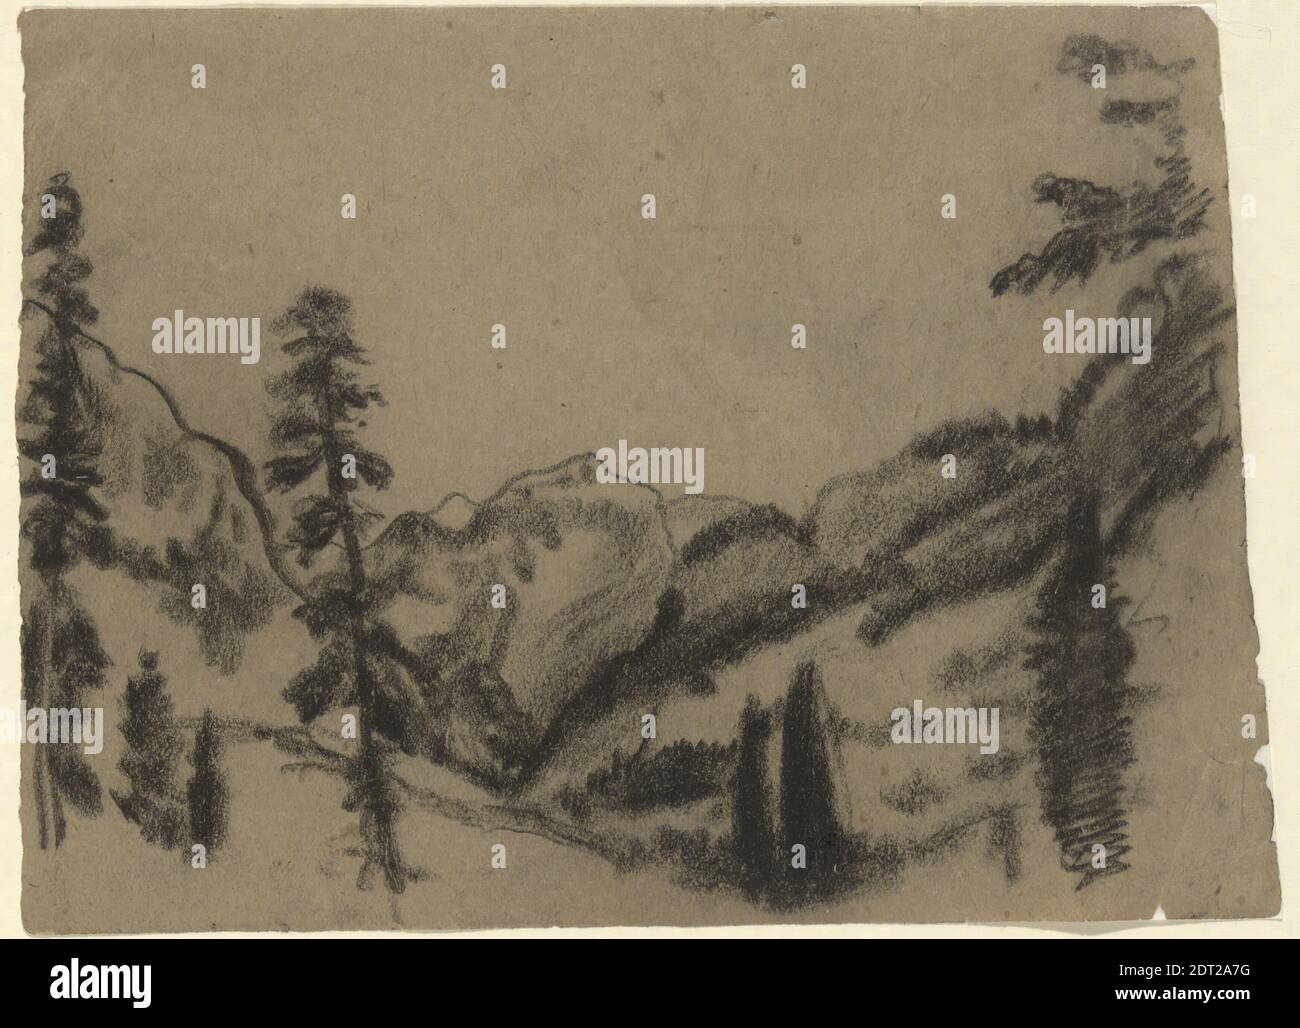 Artist: Arthur B. Davies, American, 1862–1928, Mountain Landscape with Fir Trees, Black chalk on tan paper, 11.4 × 15.9 cm (4 1/2 × 6 1/4 in.), Made in United States, American, 19th century, Works on Paper - Drawings and Watercolors Stock Photo